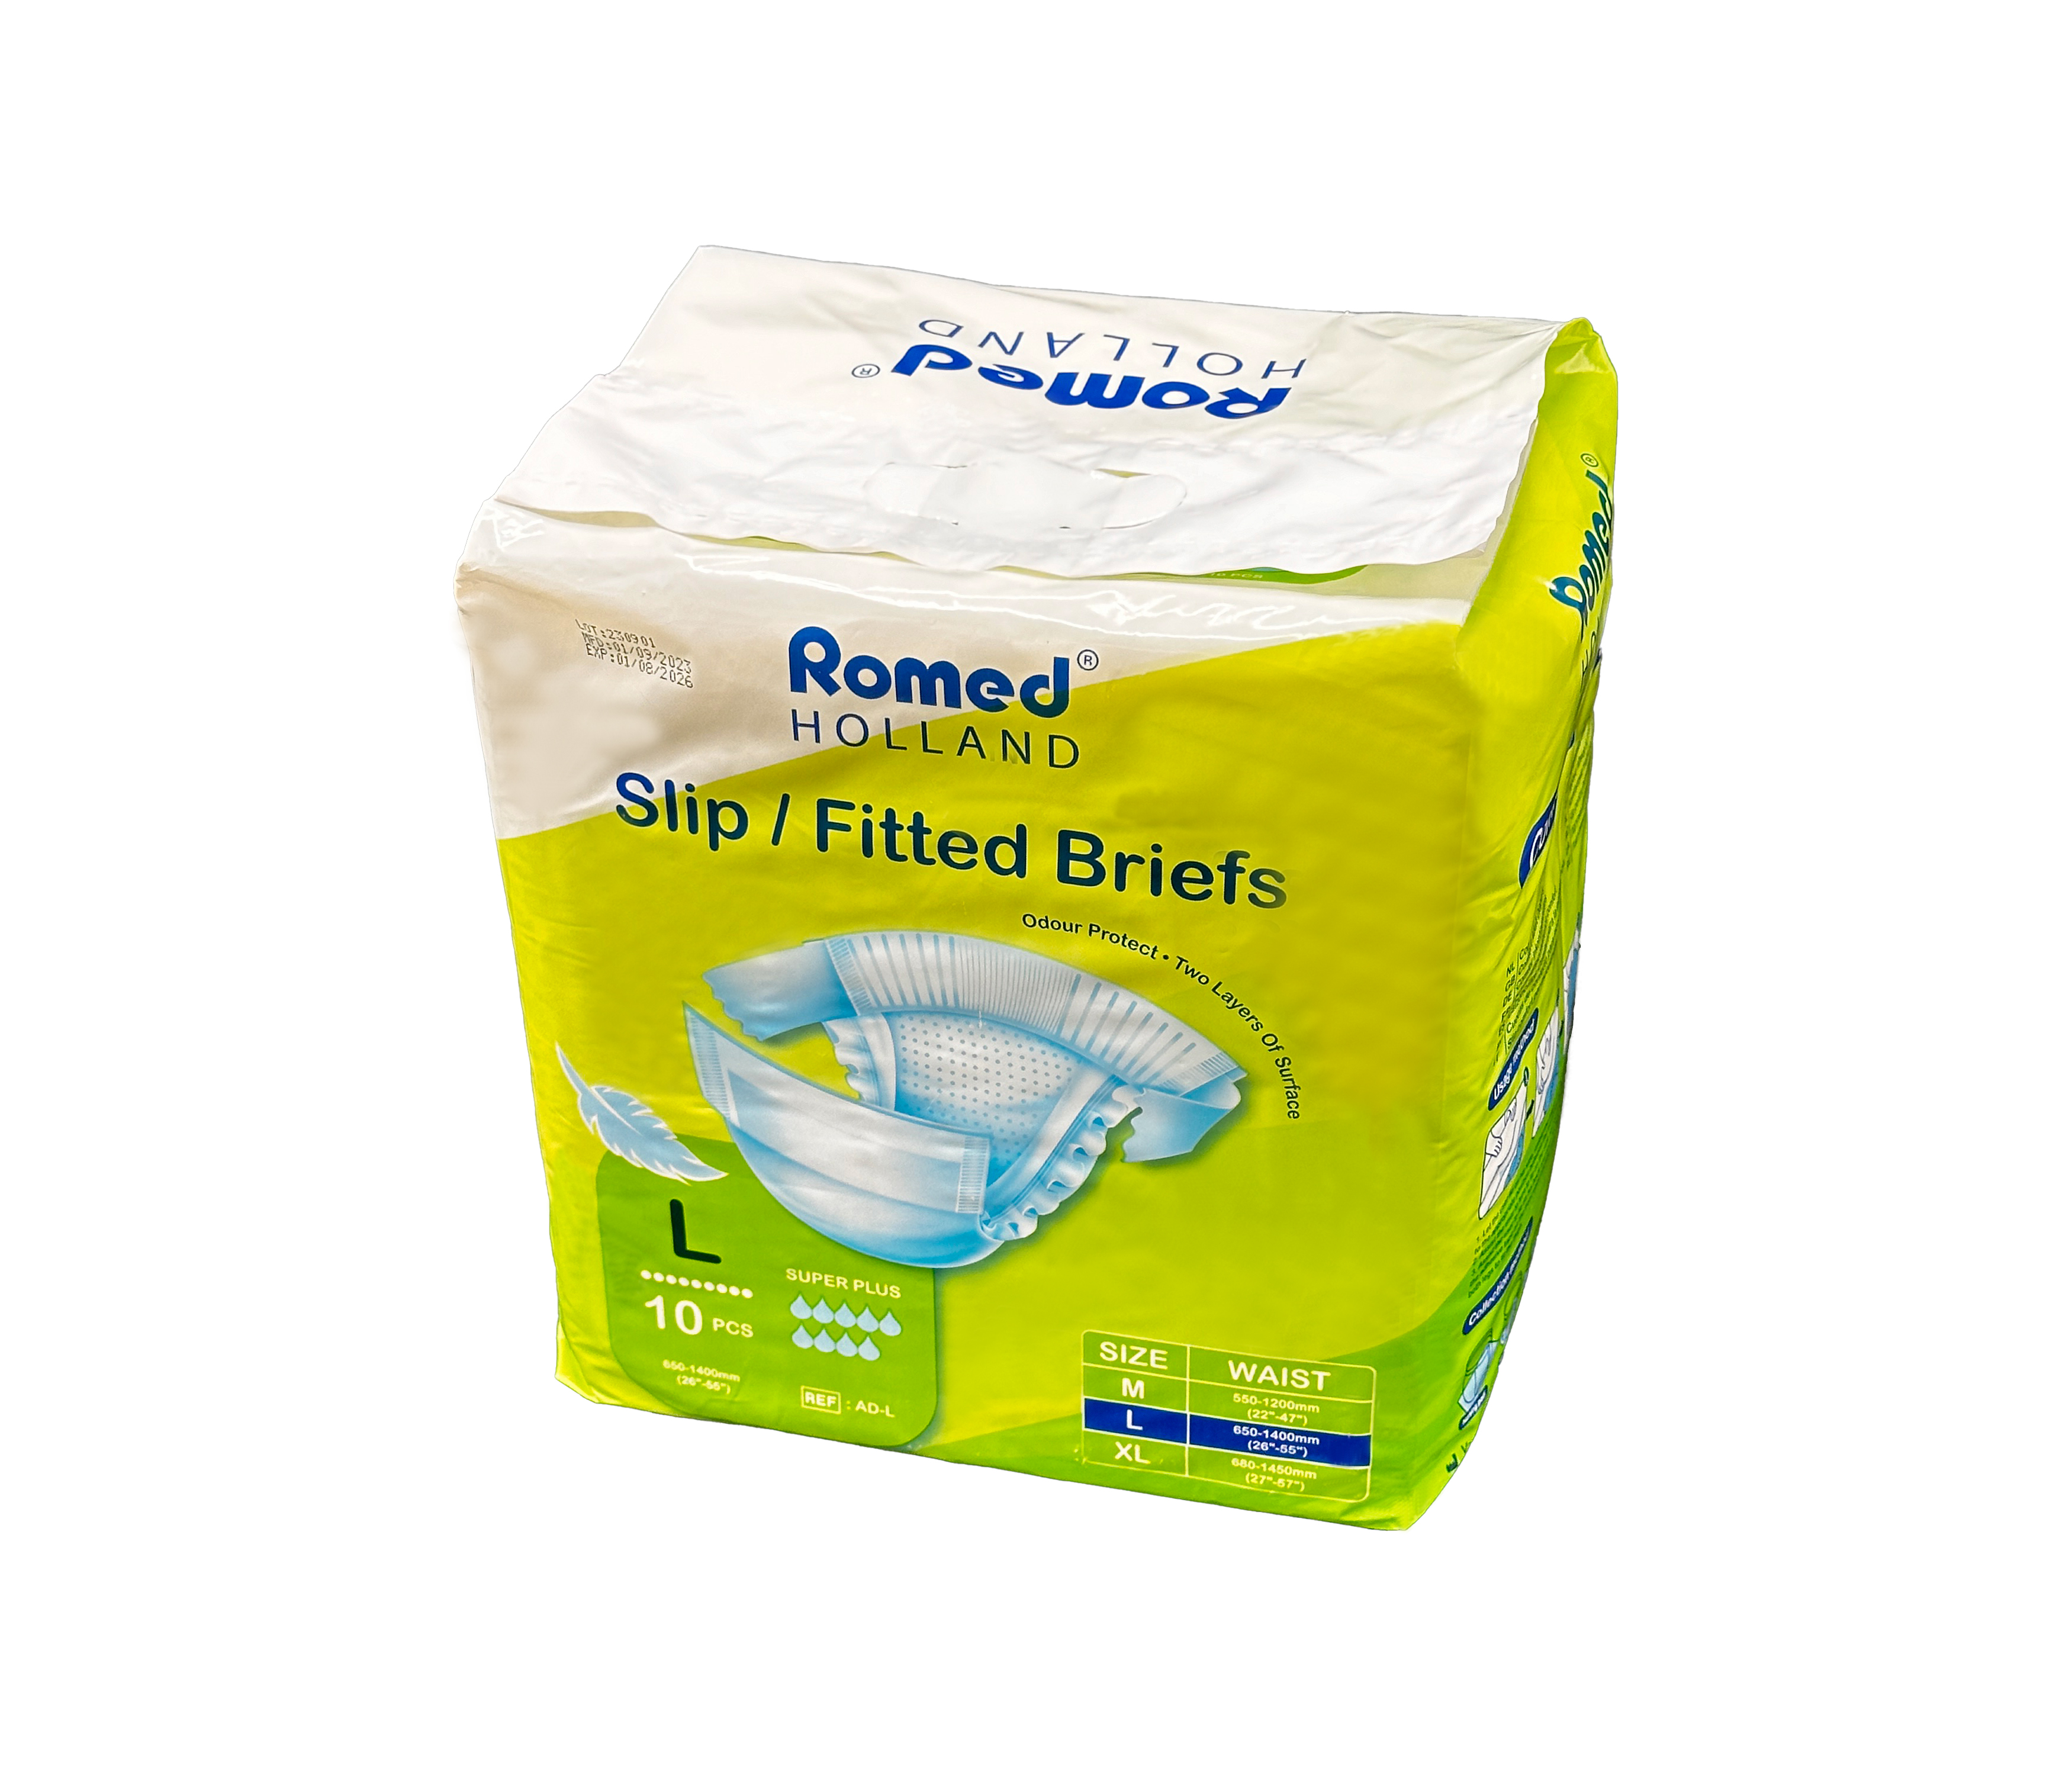 AD-L Romed Comfort Adult Diapers, large, 10 pcs in a bag, 12 bags in a carton.

- Soft feel & Breathable
- Odour Protect
- Two Layers of Surface
- Wetness indicator
- Unisex
- Size: large (650-1400mm (26''-55'')